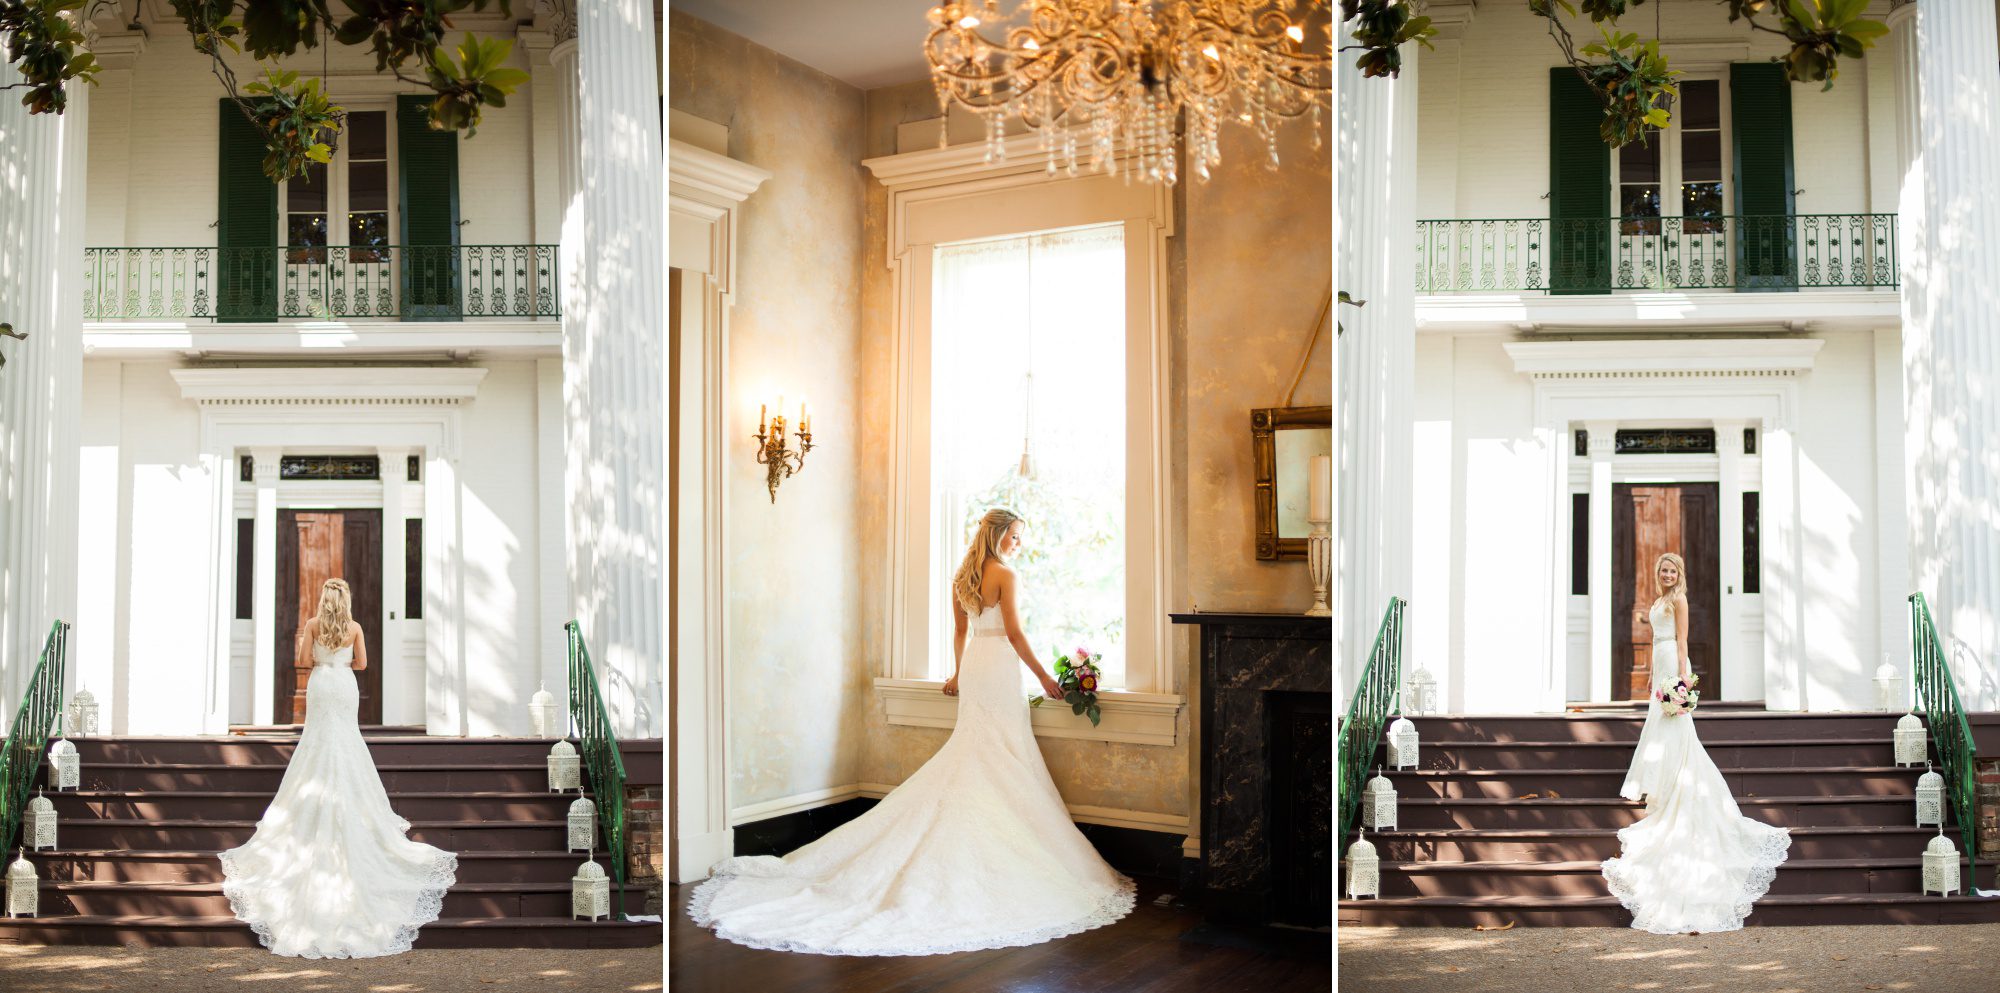 Bridal portraits before wedding ceremony at Riverwood Mansion in Nashville, Tennessee. Photography by Krista Lee.